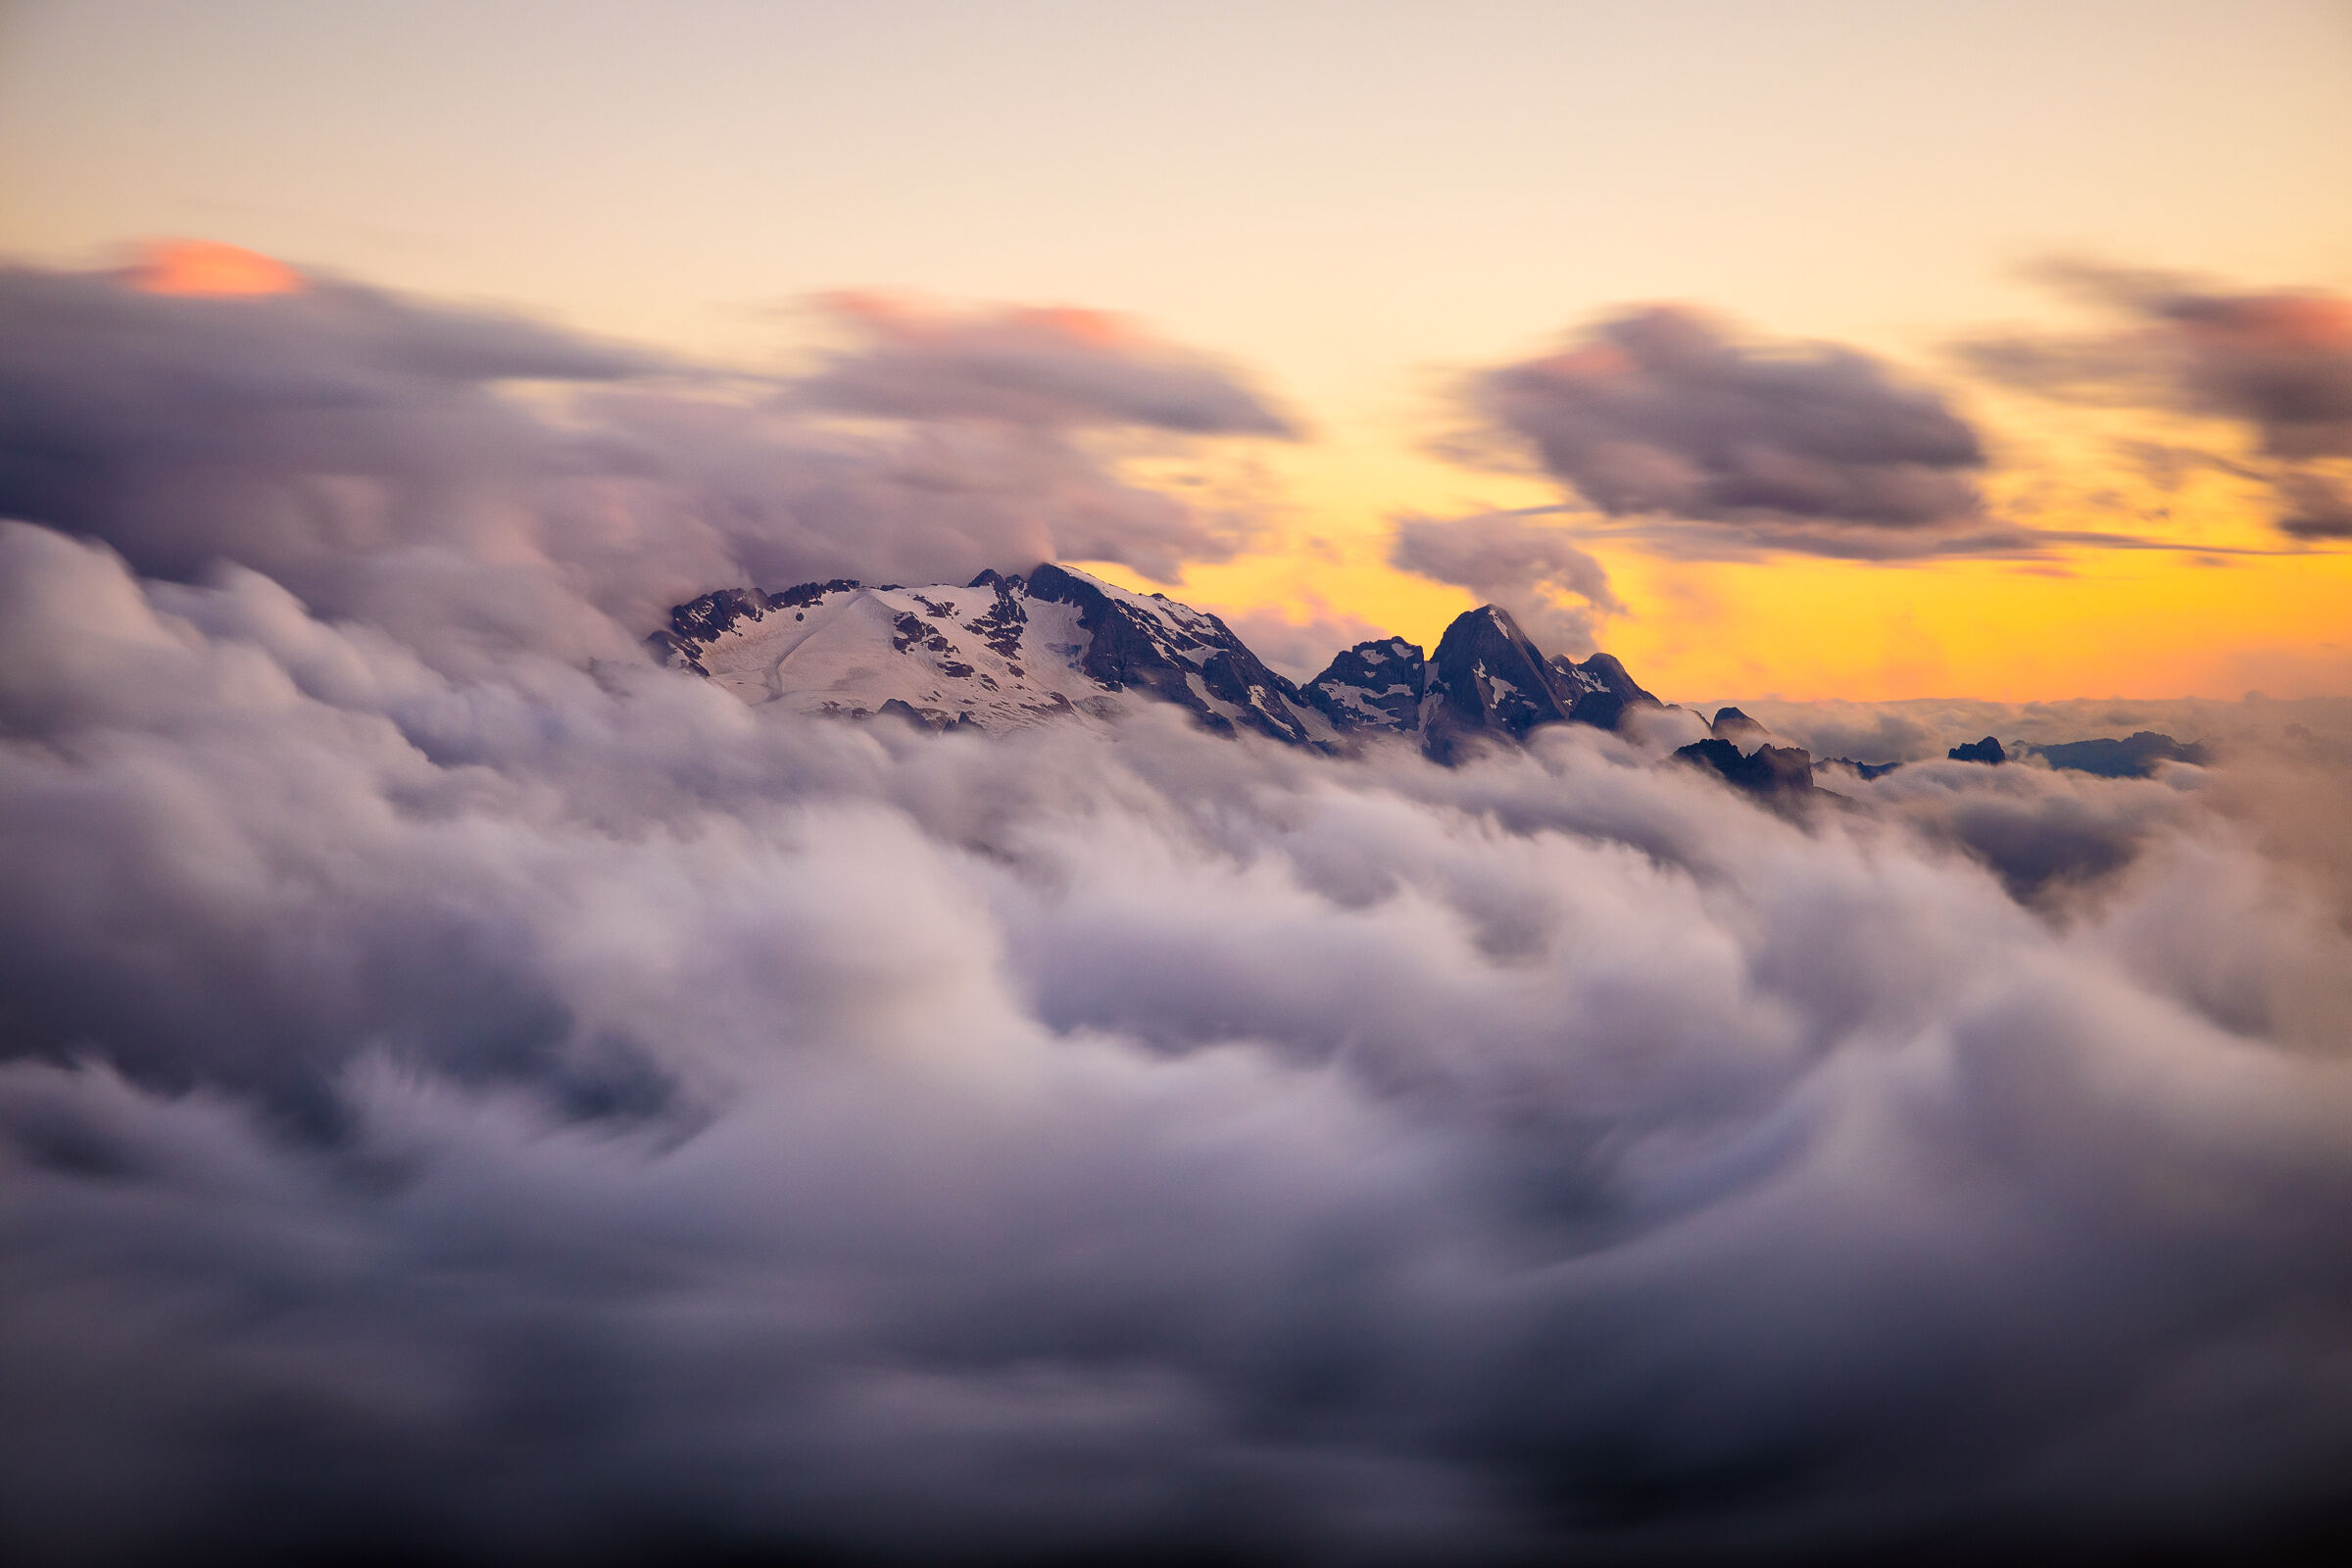 Marmolada emerges from the sea of clouds...